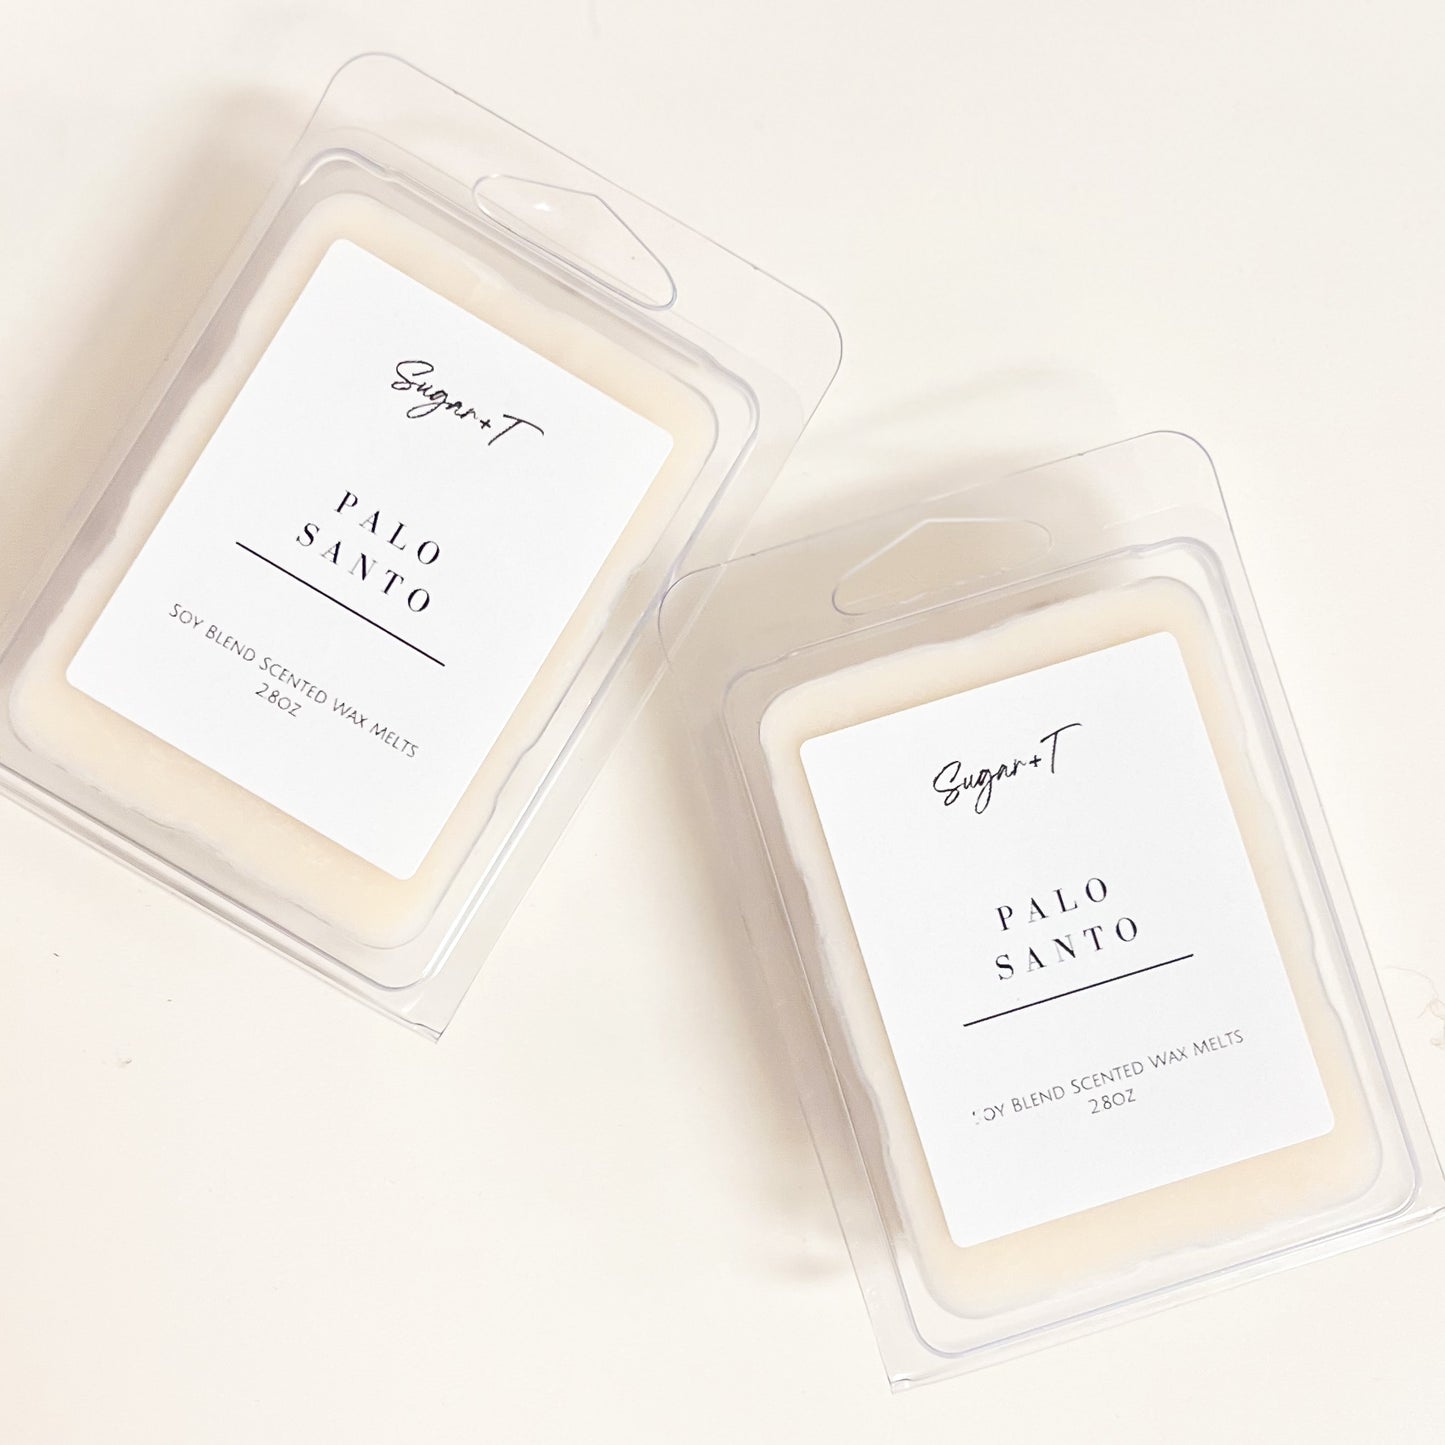 Palo Santo Scented Wax Melts